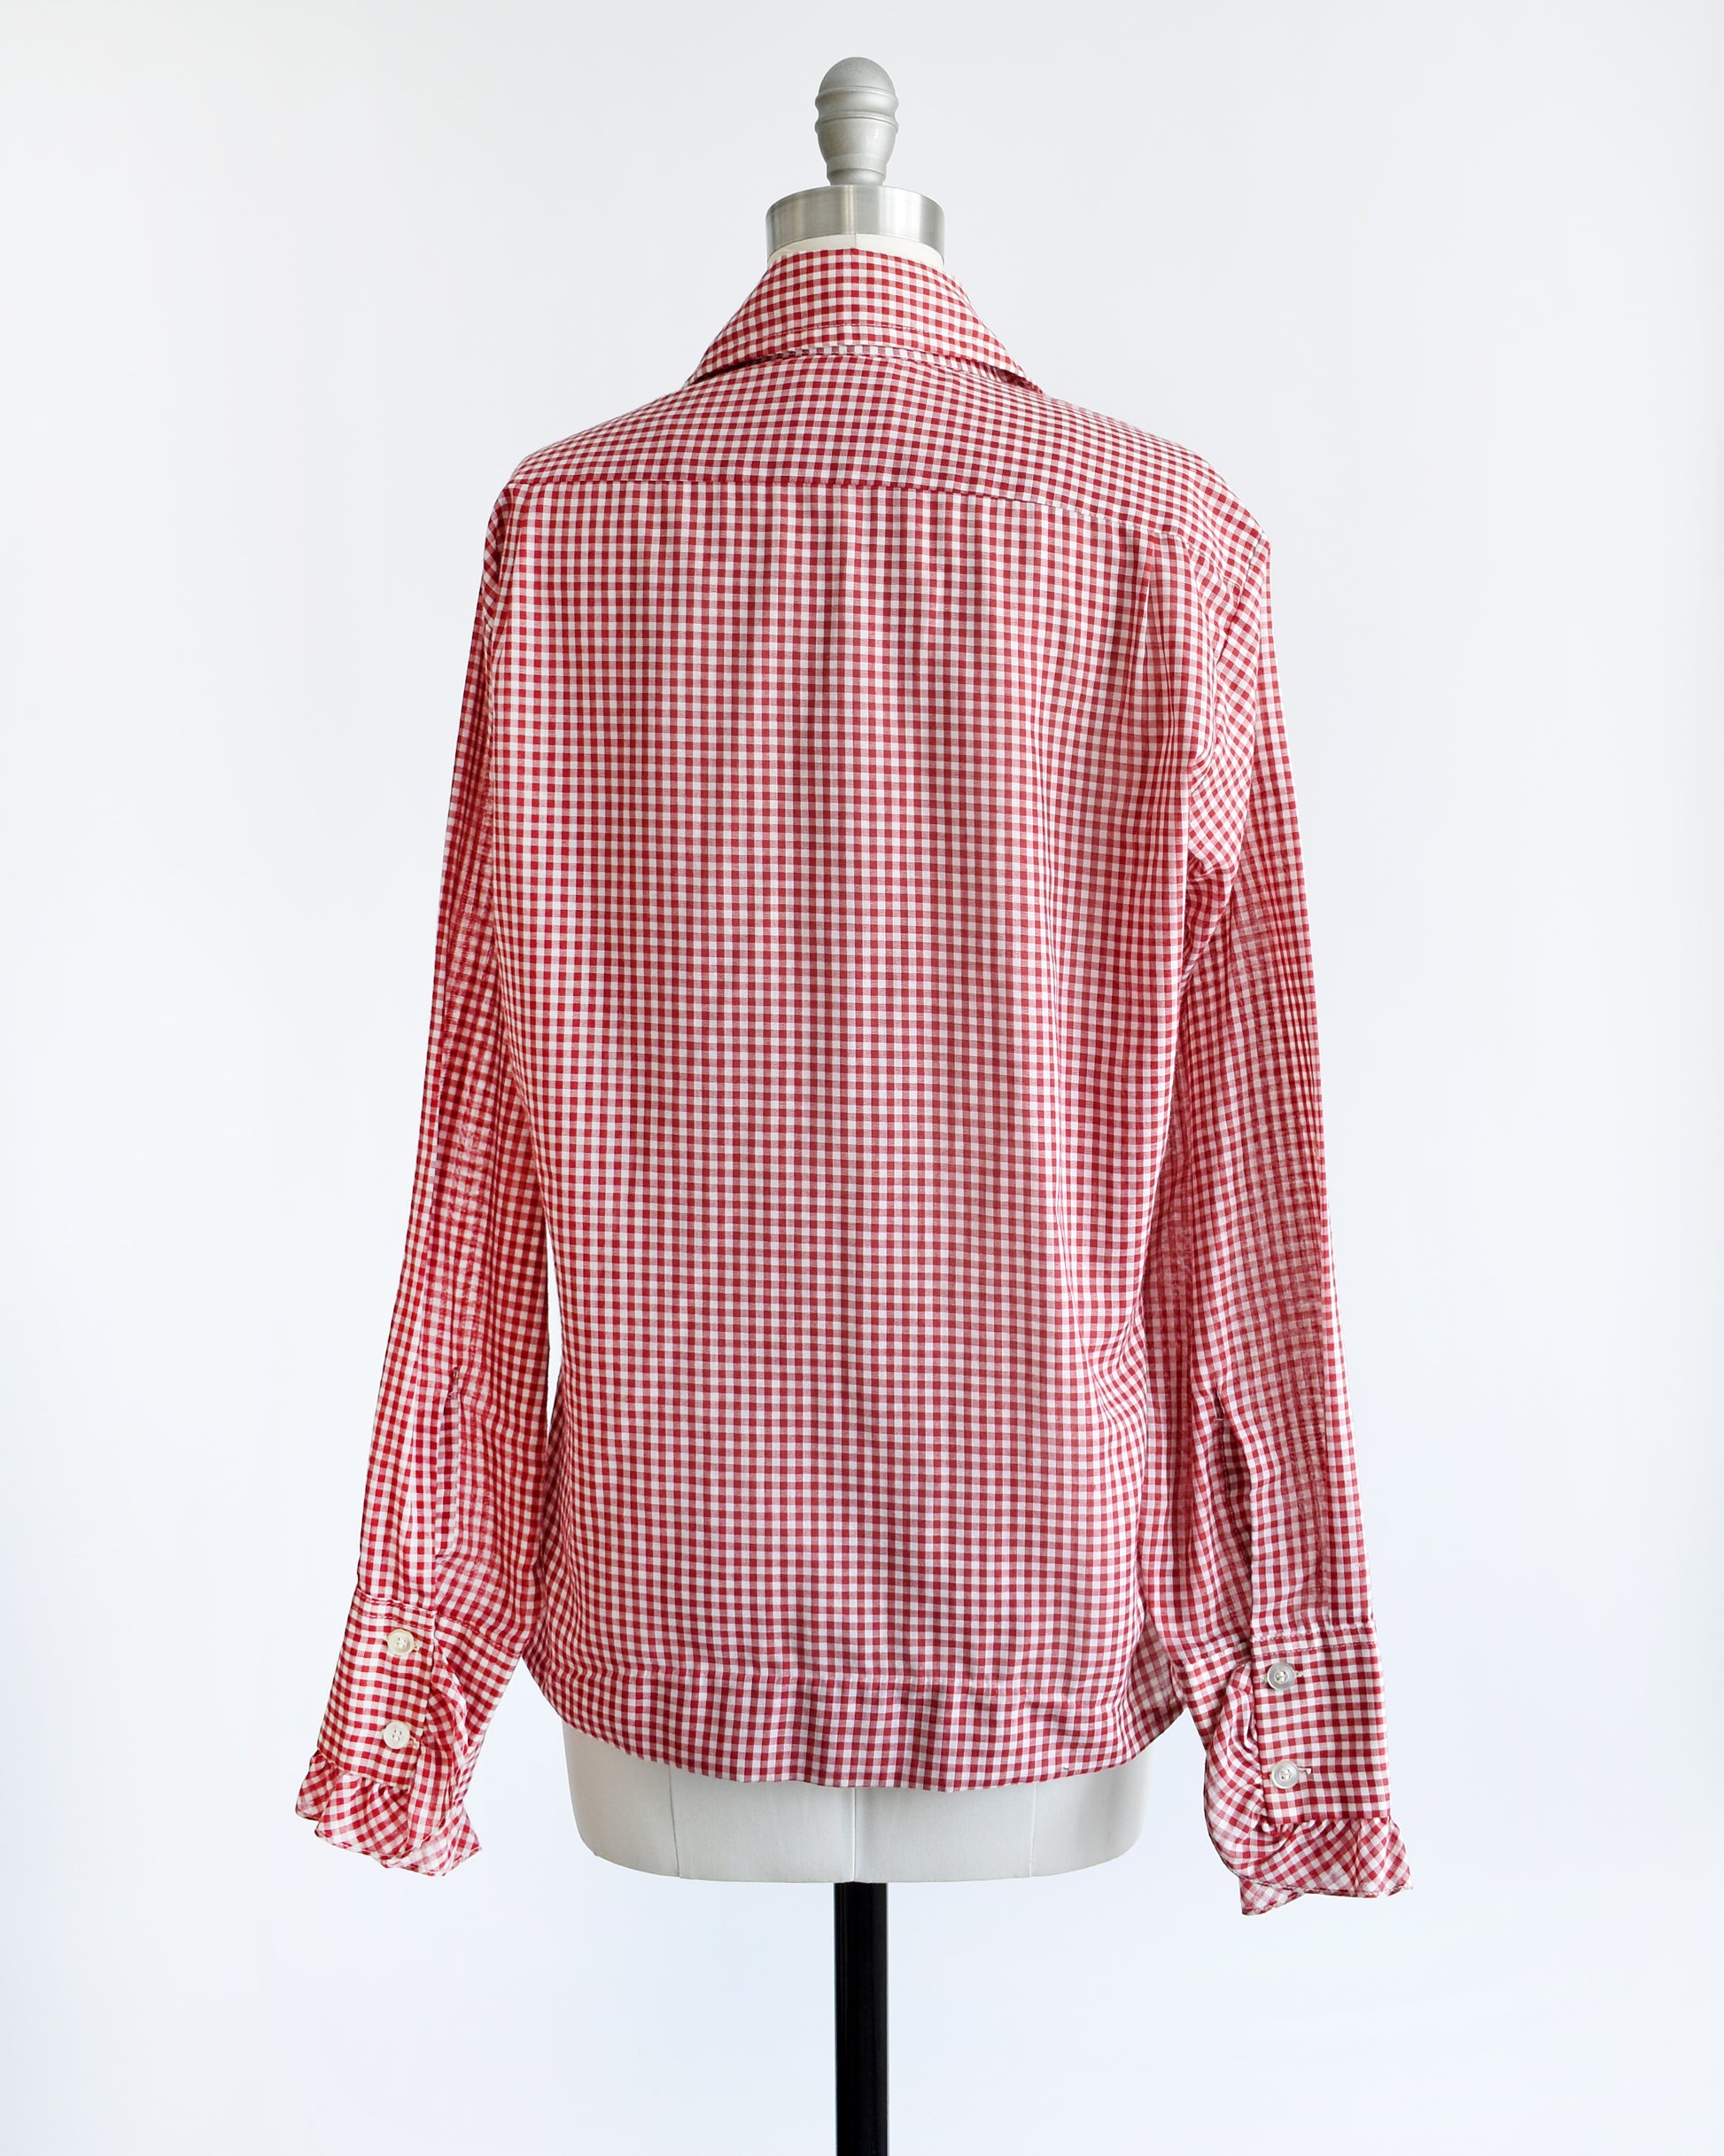 Back view of a vintage 1970s red and white gingham check with tow plastic buttons  on the ruffled cuffs